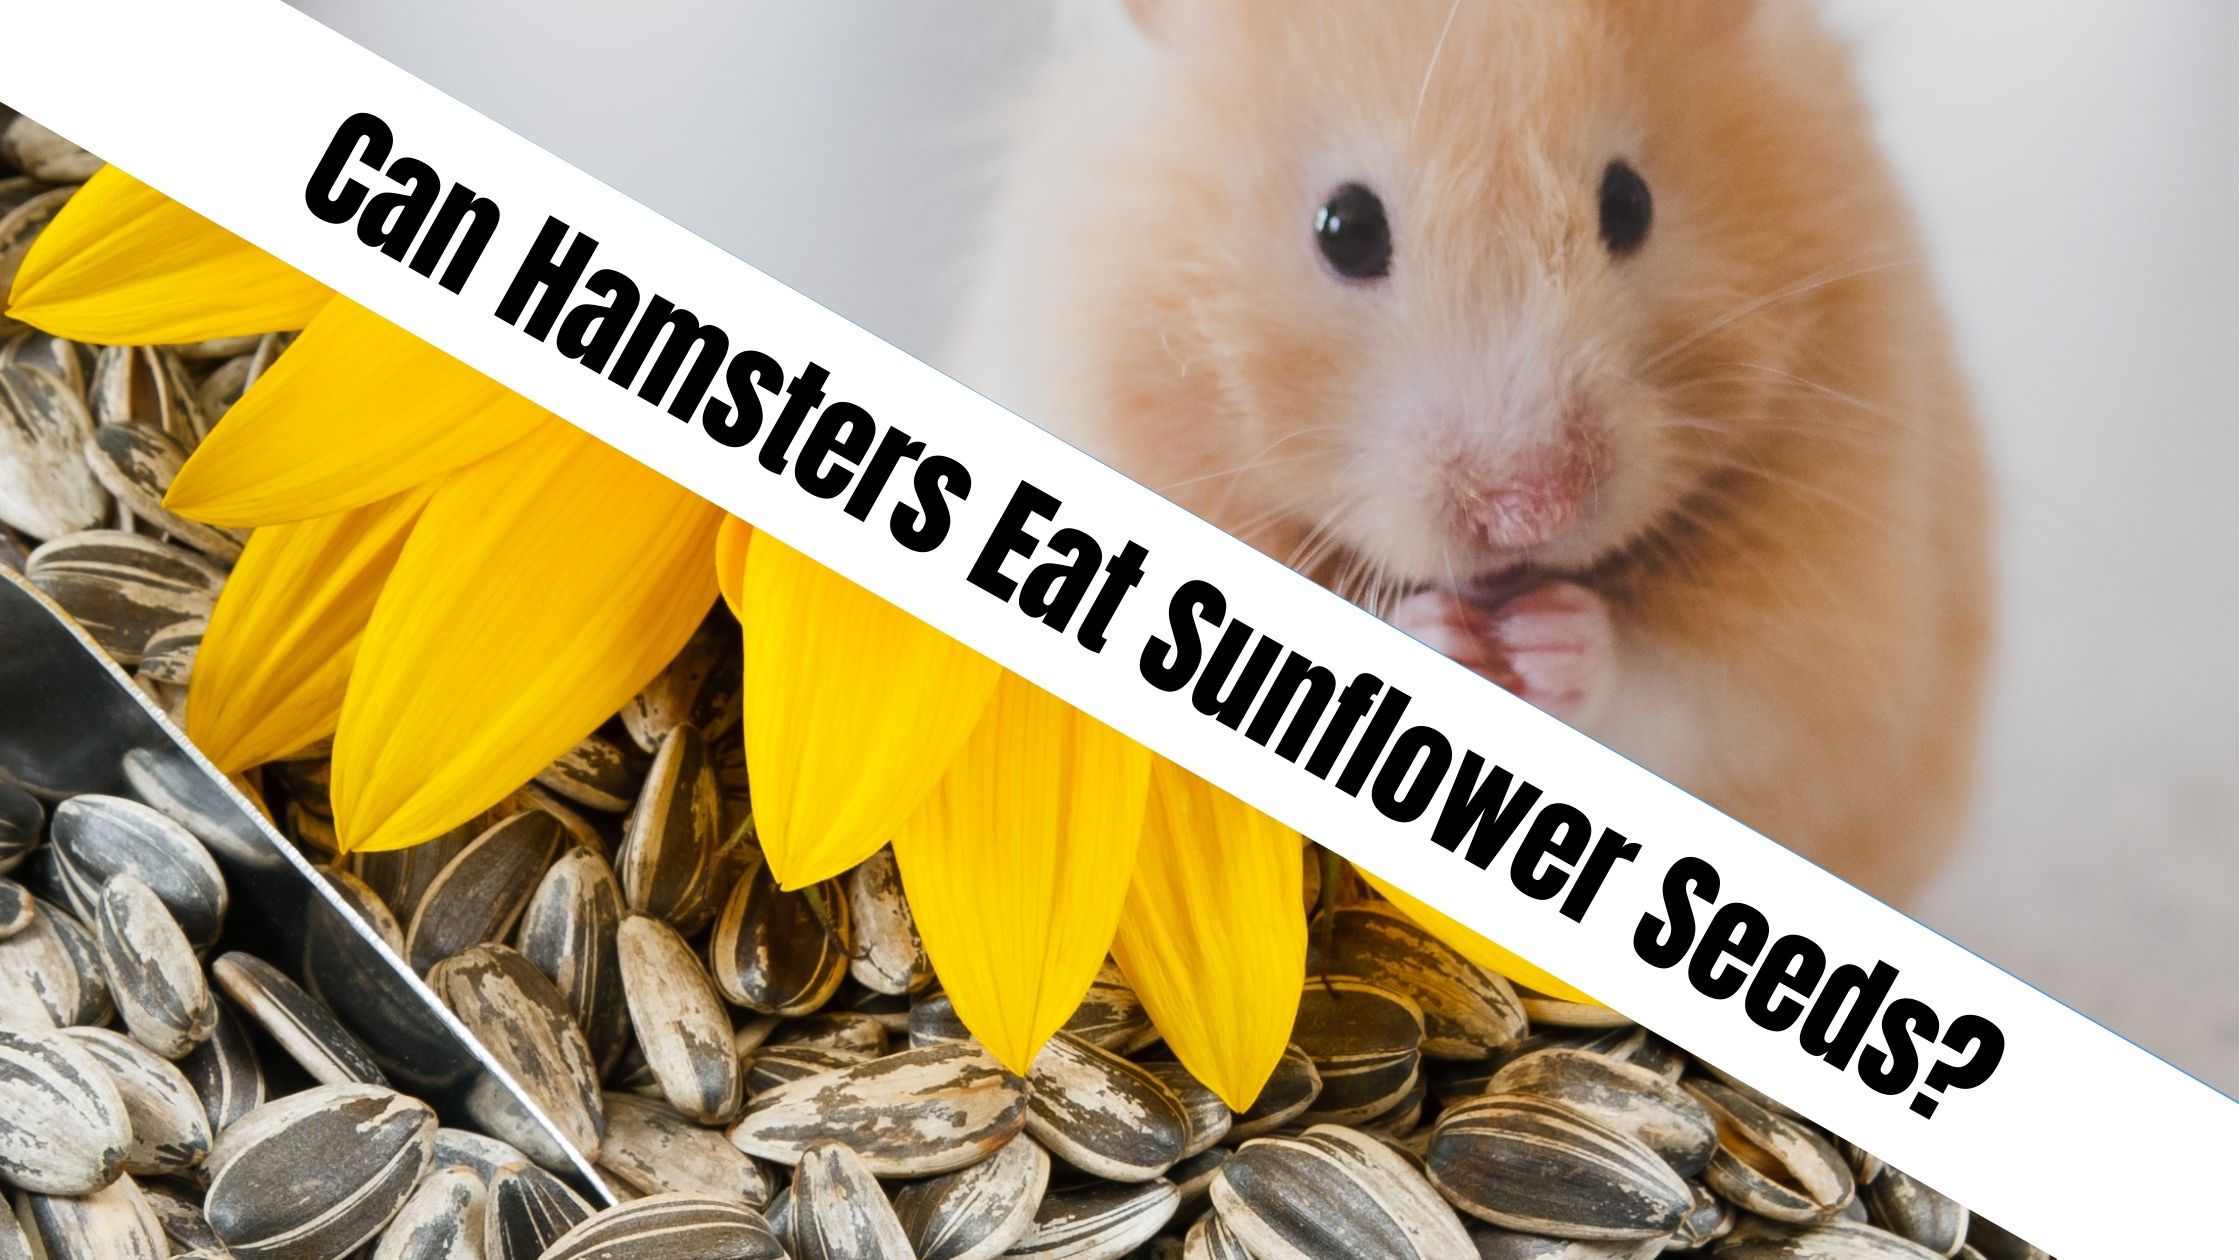 Can Hamsters Eat Sunflower Seeds? Let's Find Out!